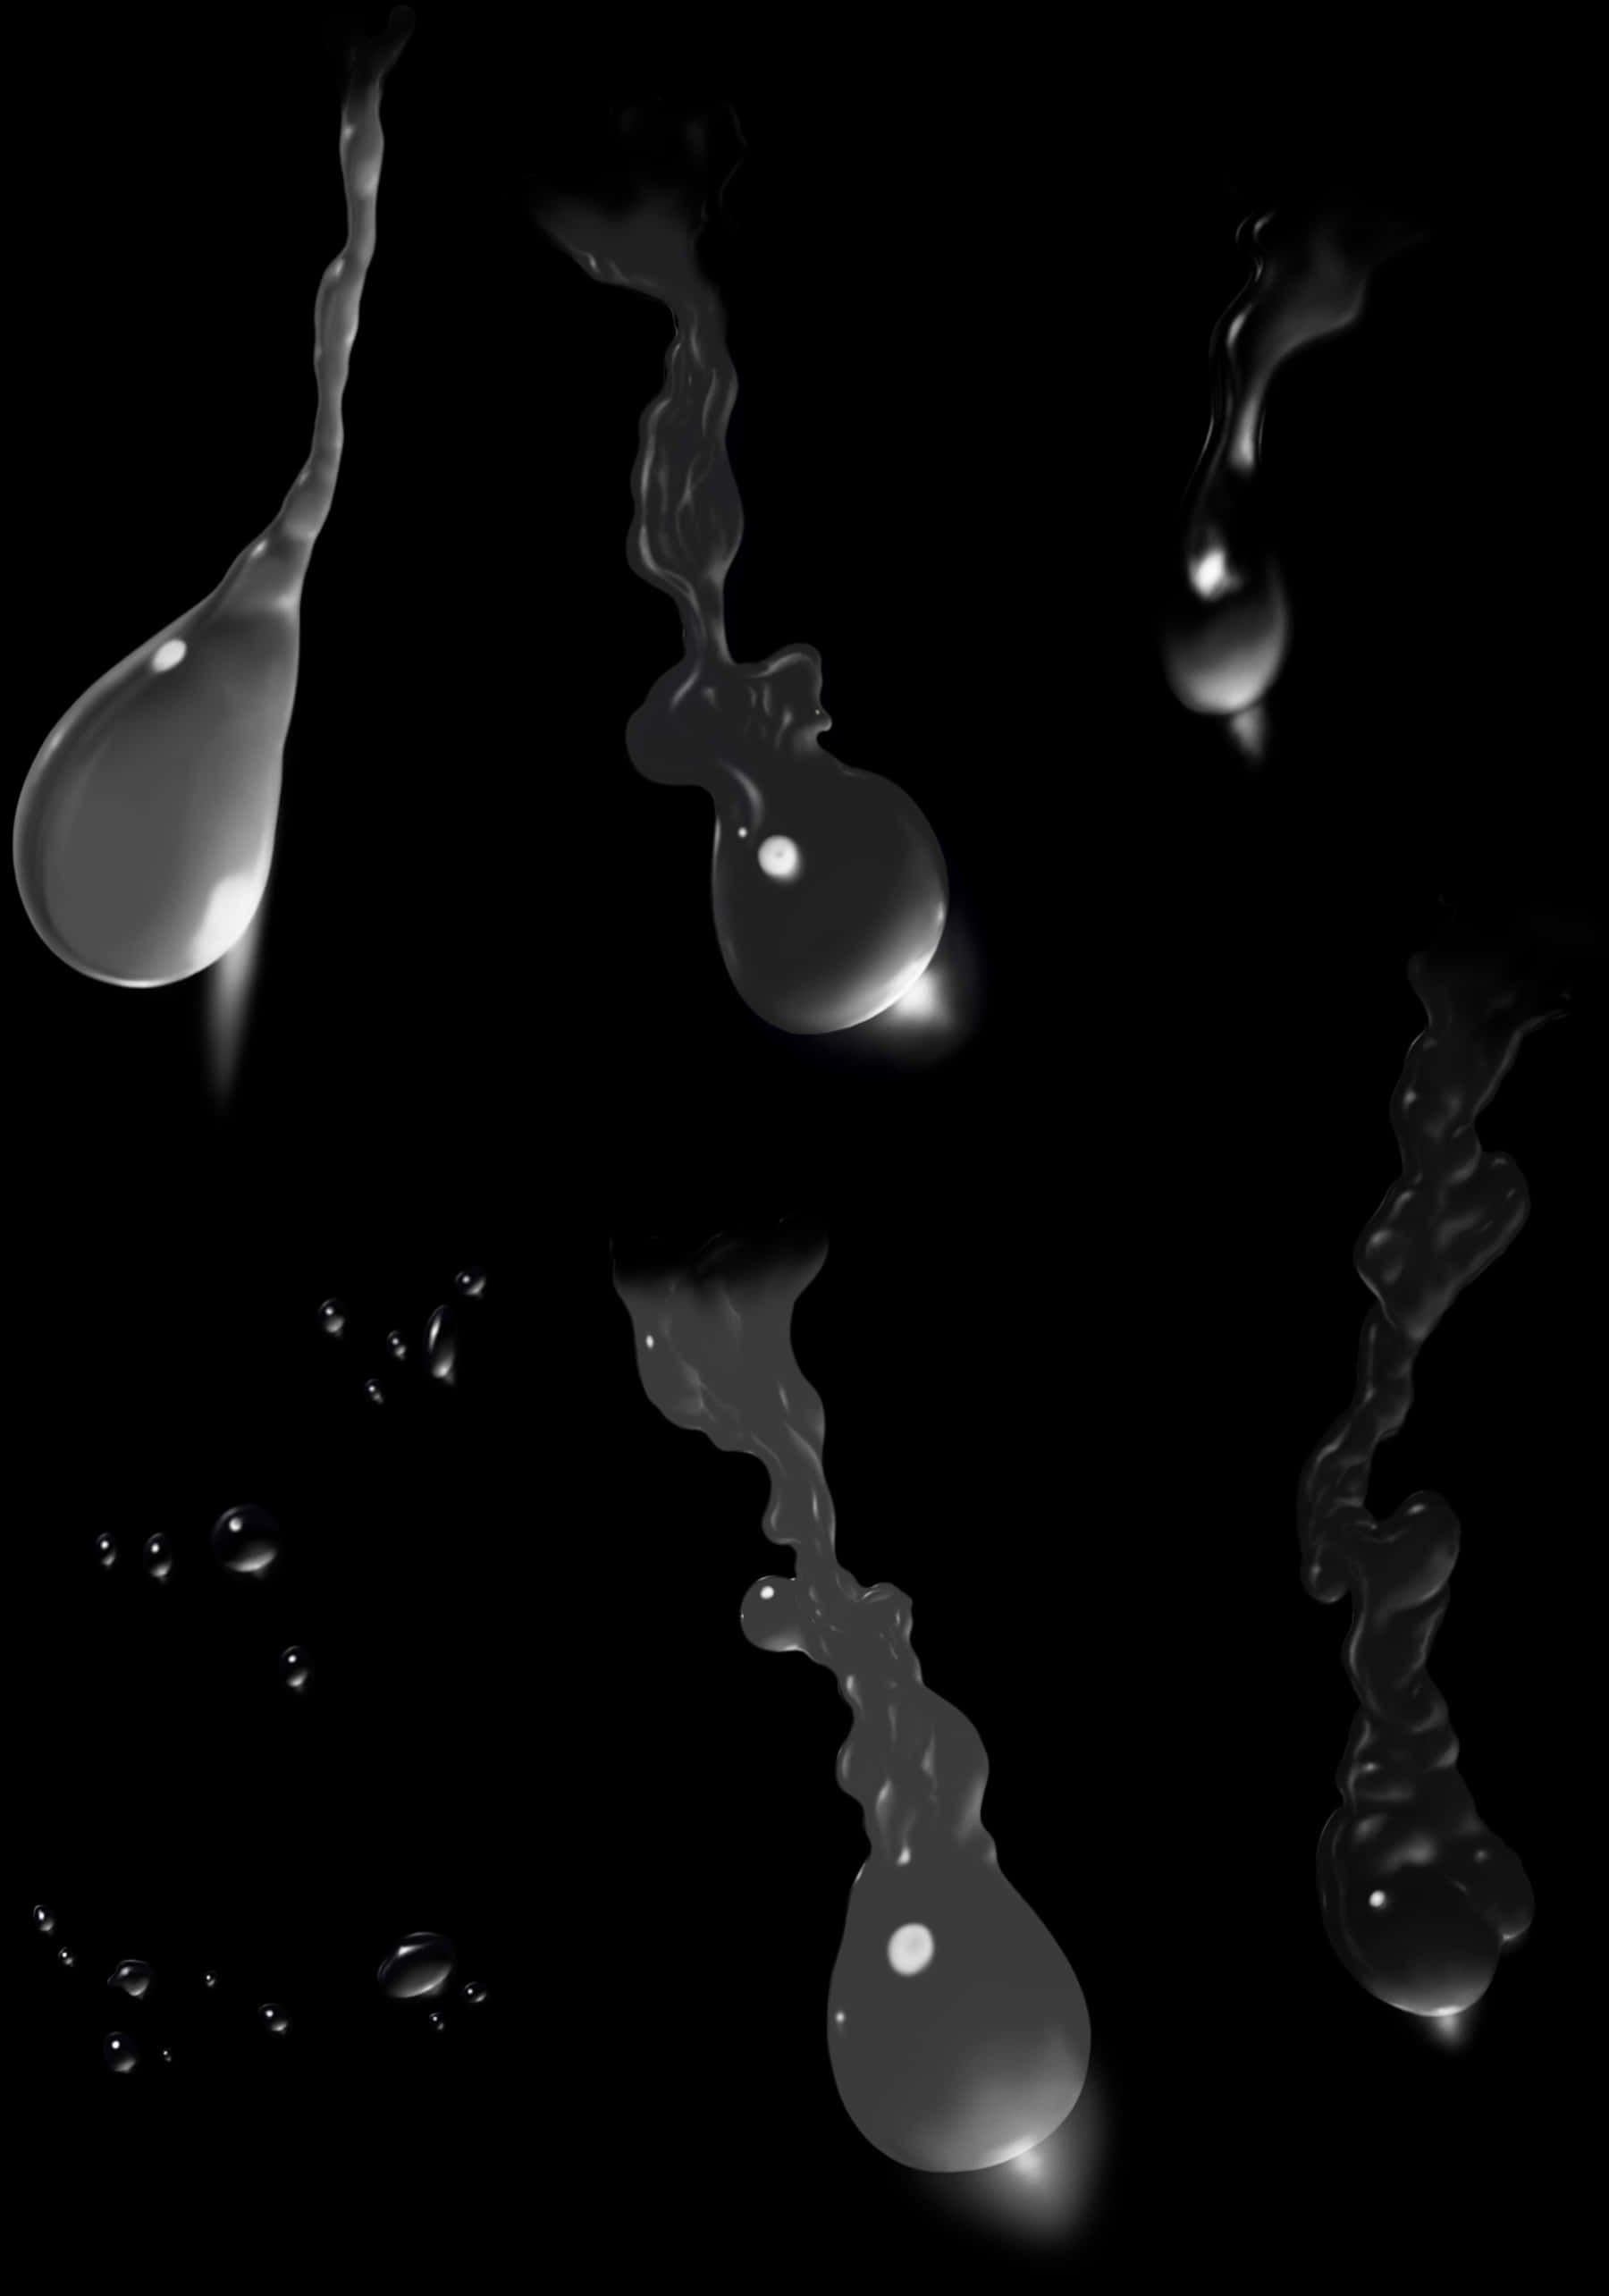 Abstract Tearsin Blackand White